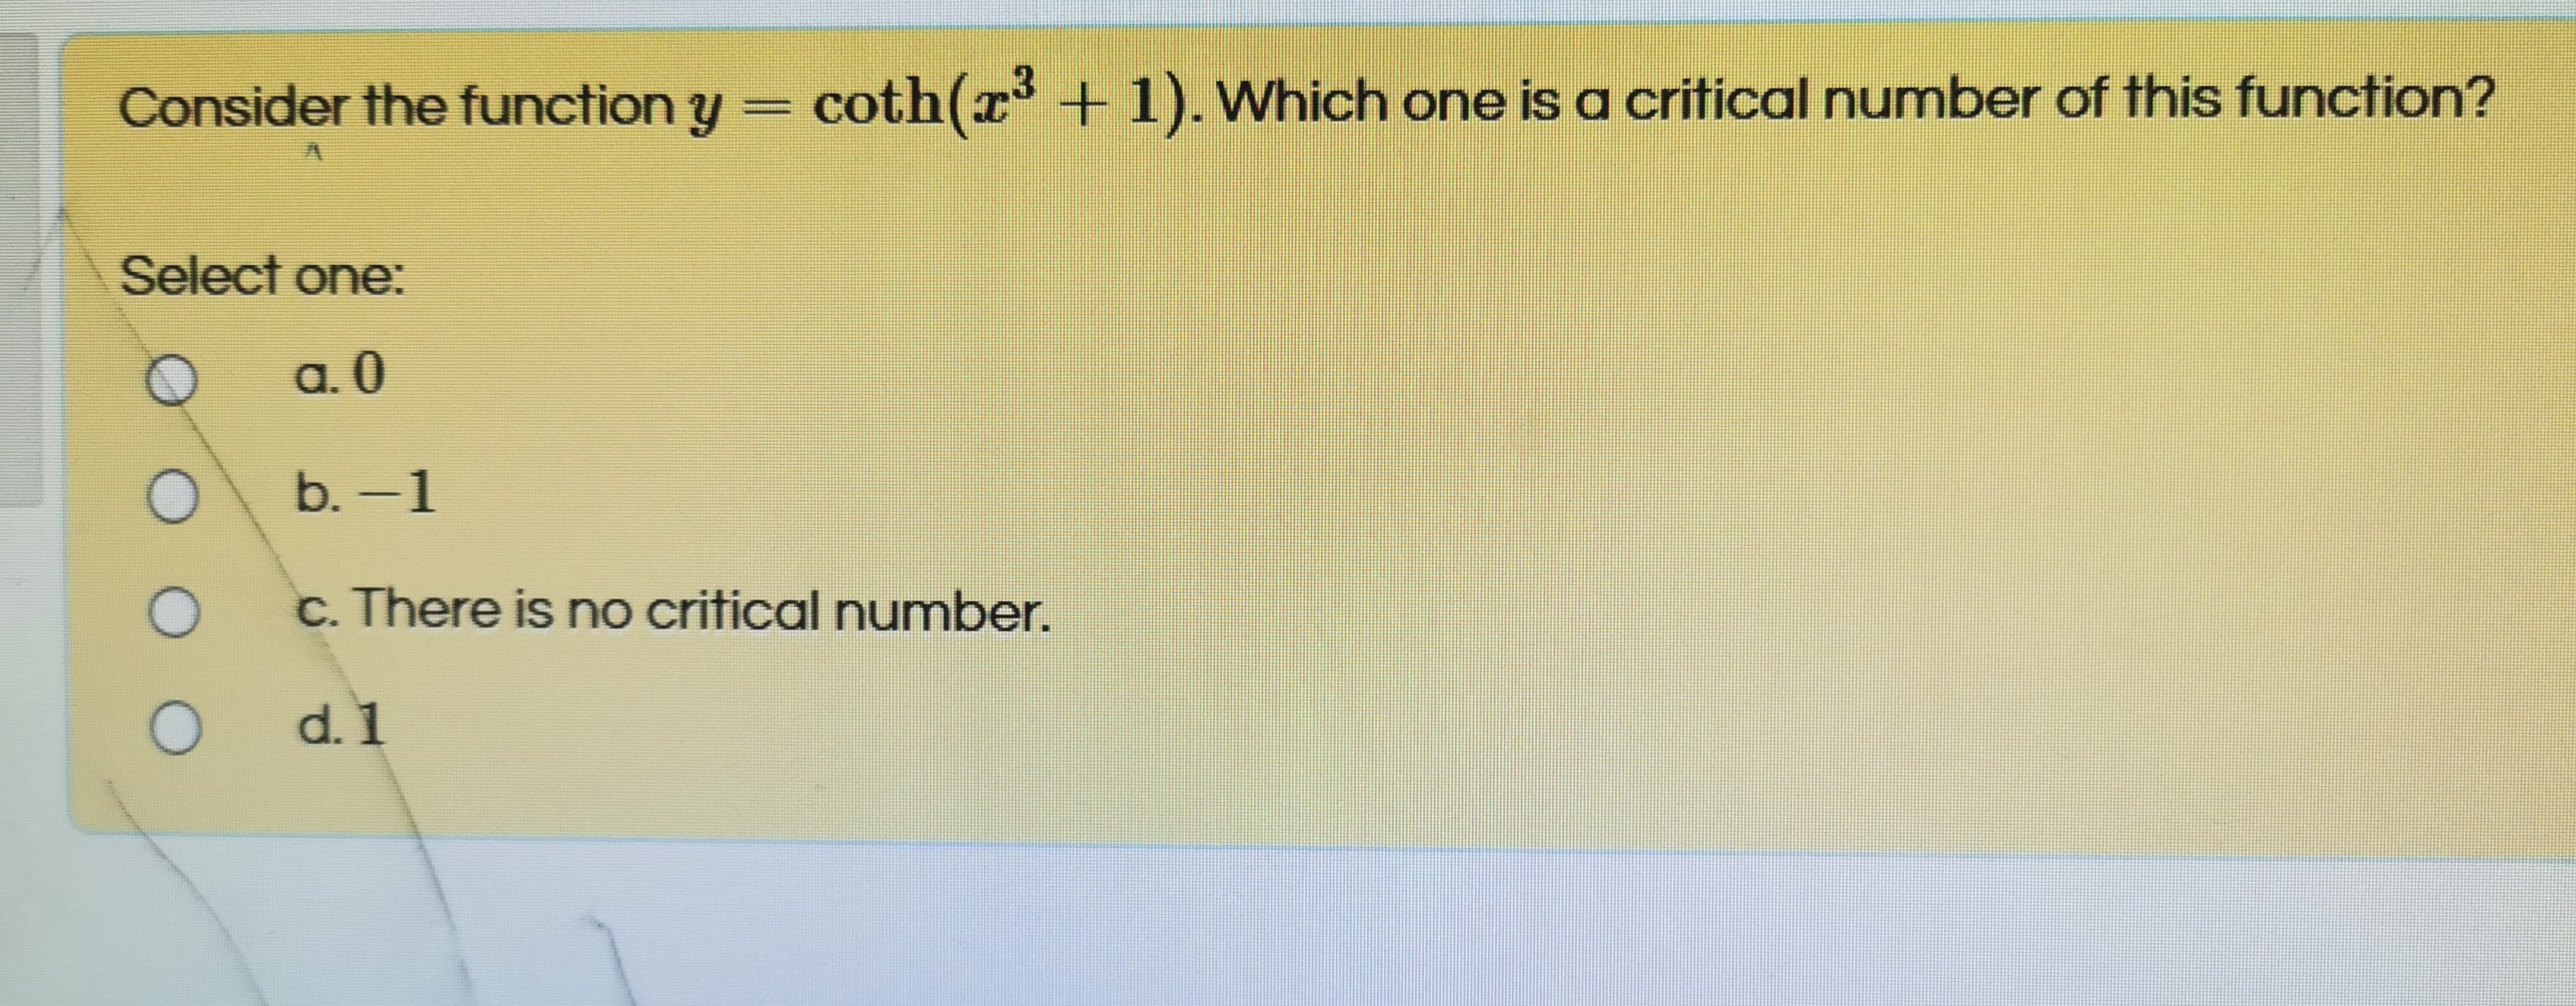 Consider the function y = coth(x + 1). Which one is a critical number of this function?
